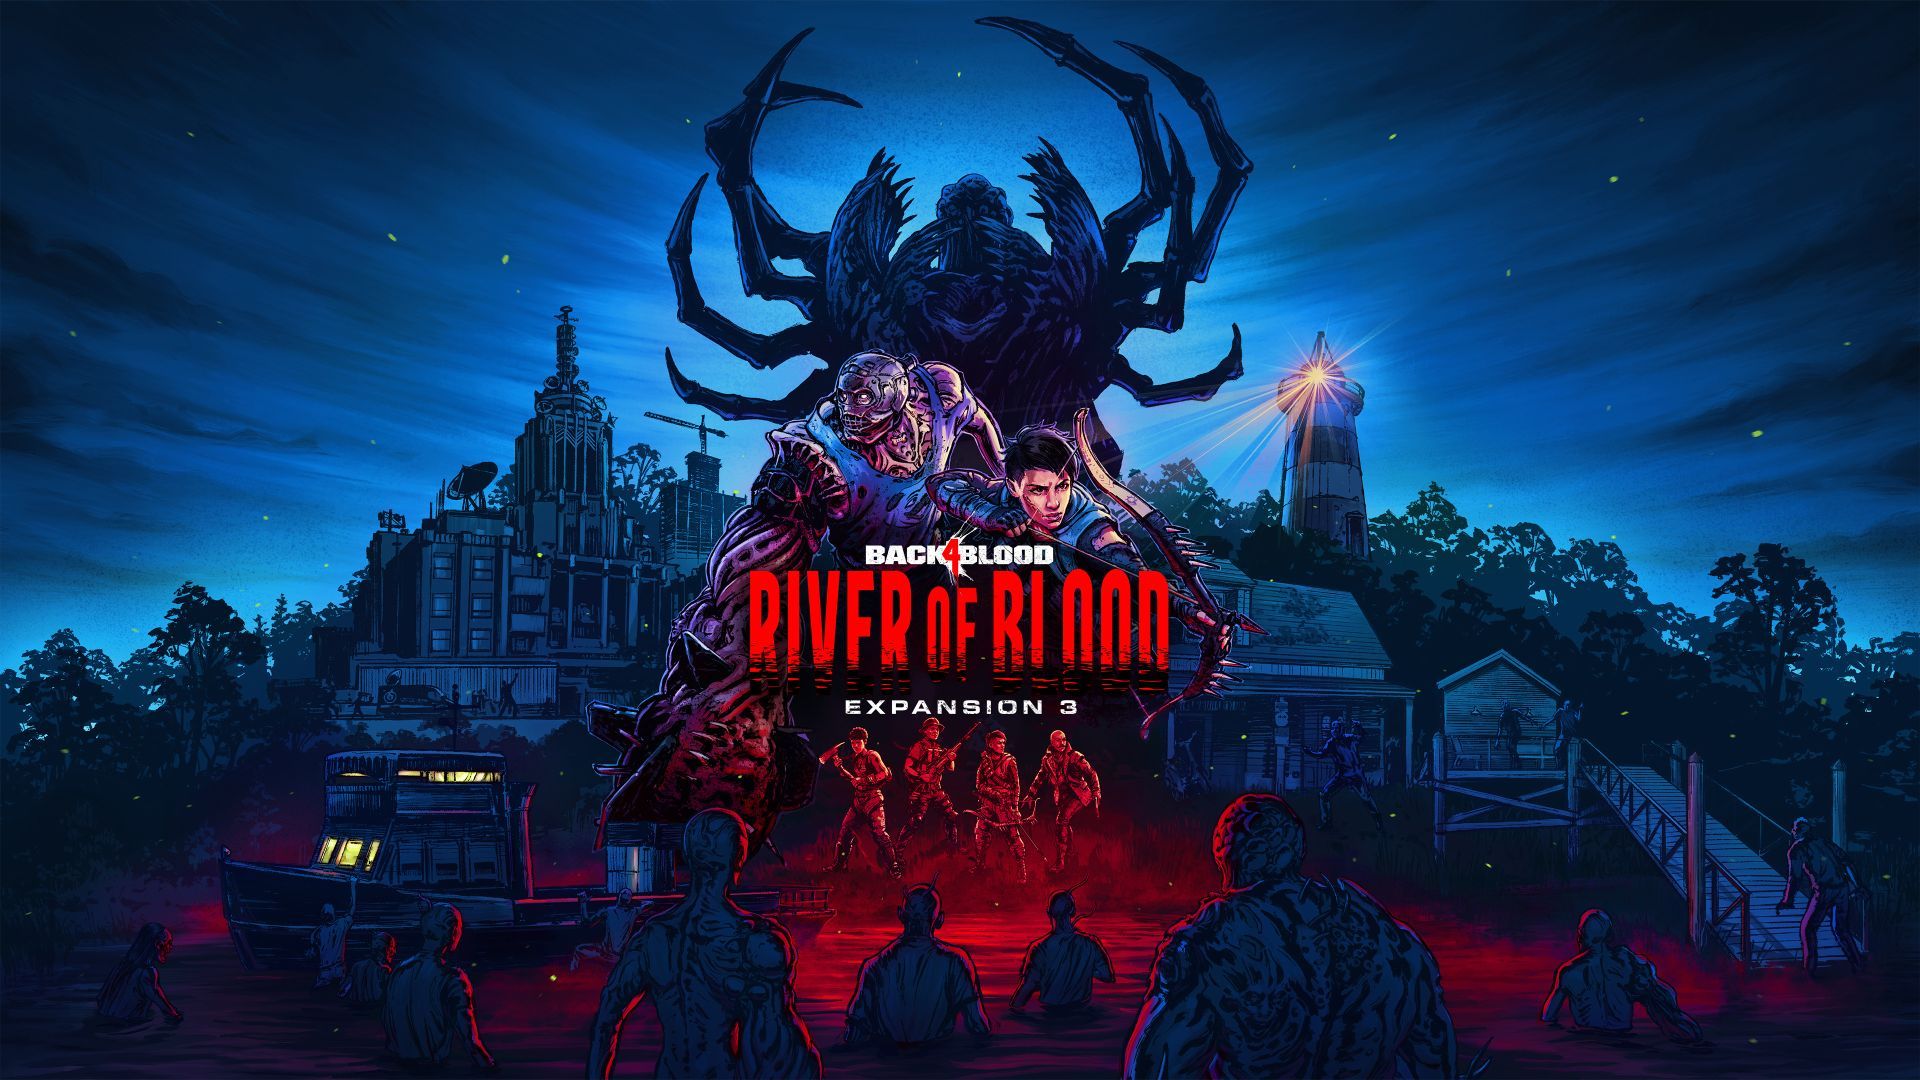 Back 4 Blood's Third Expansion, River of Blood, Available Today